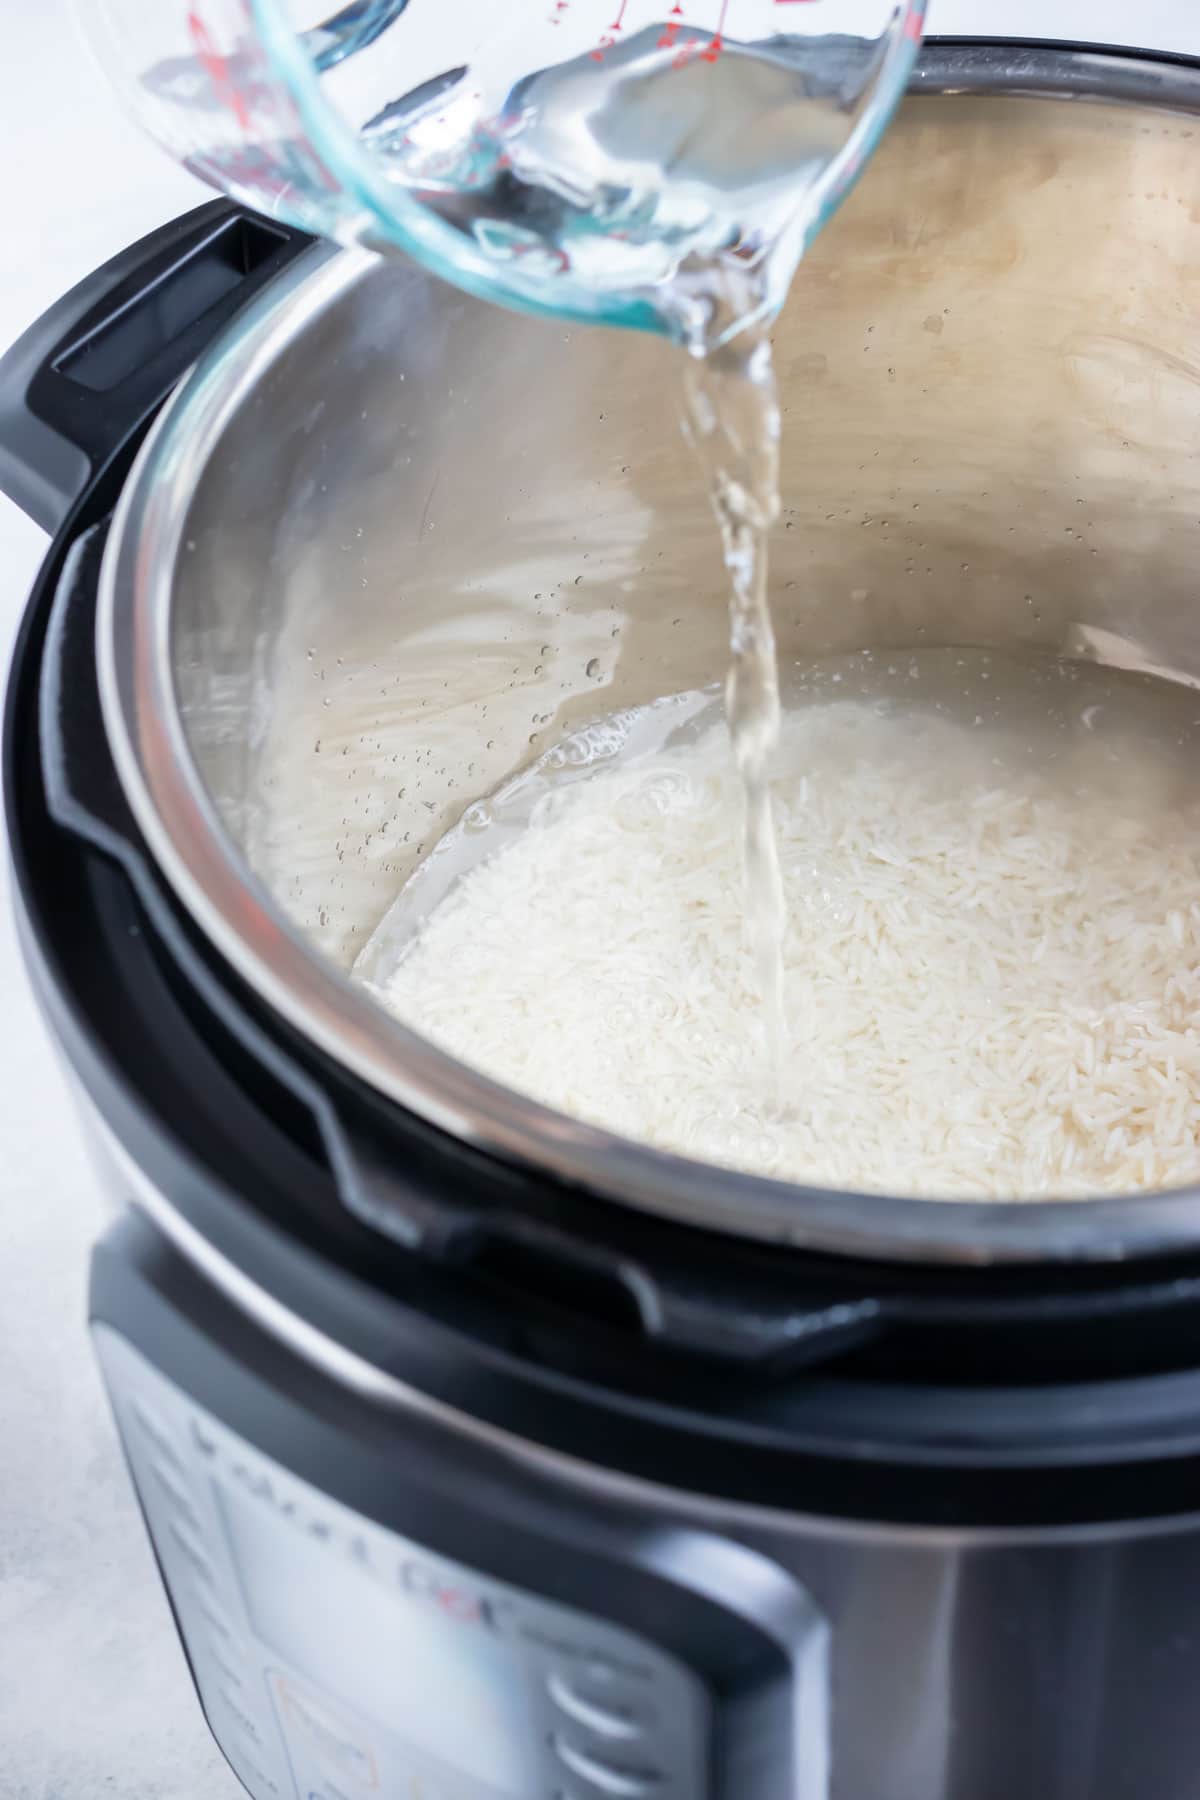 Rice and water being added to an Instant Pot for cooking.